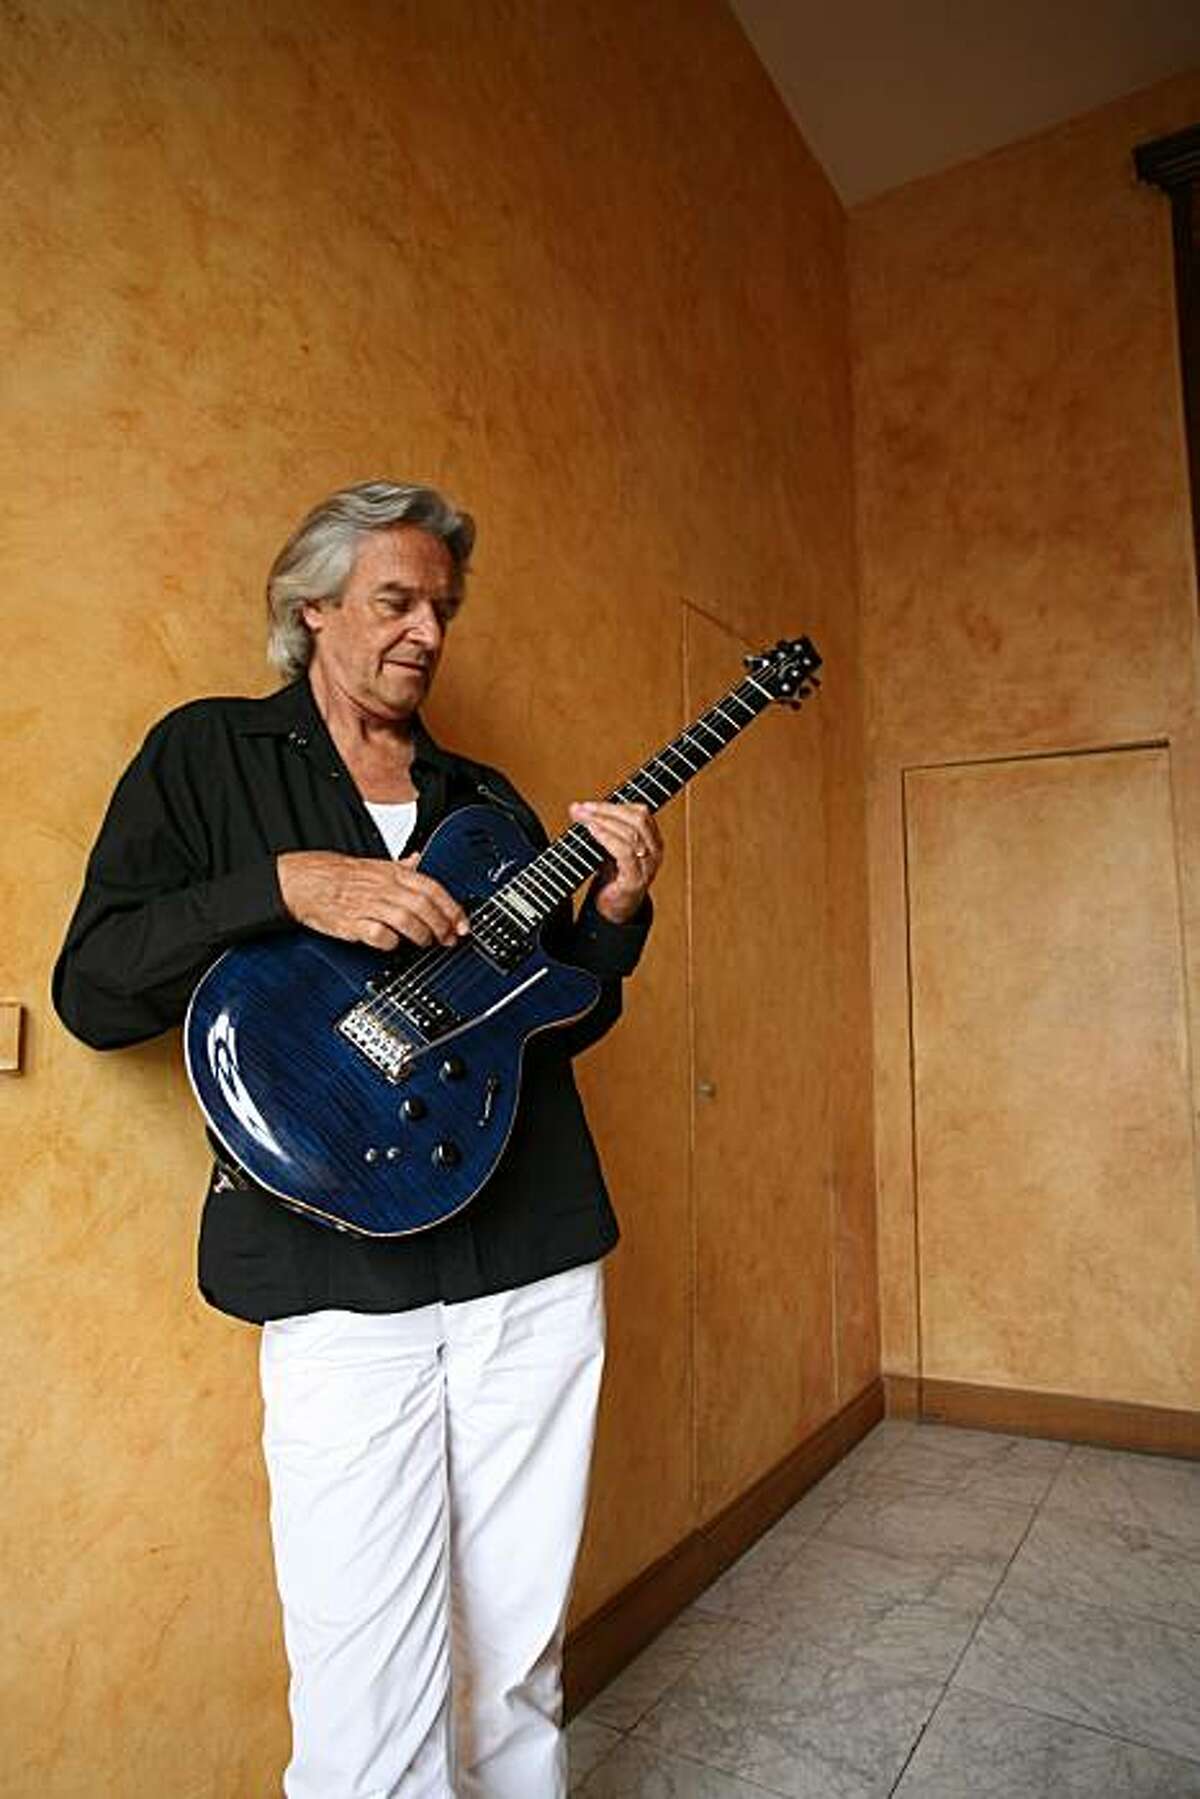 Grammy-winning guitarist and composer John McLaughlin and the 4th Dimension will perform at 8 p.m. Dec. 11 at Zellerbach Hall, UC Berkeley. (510) 642-9988, www.calperformances.org. $36-$72.